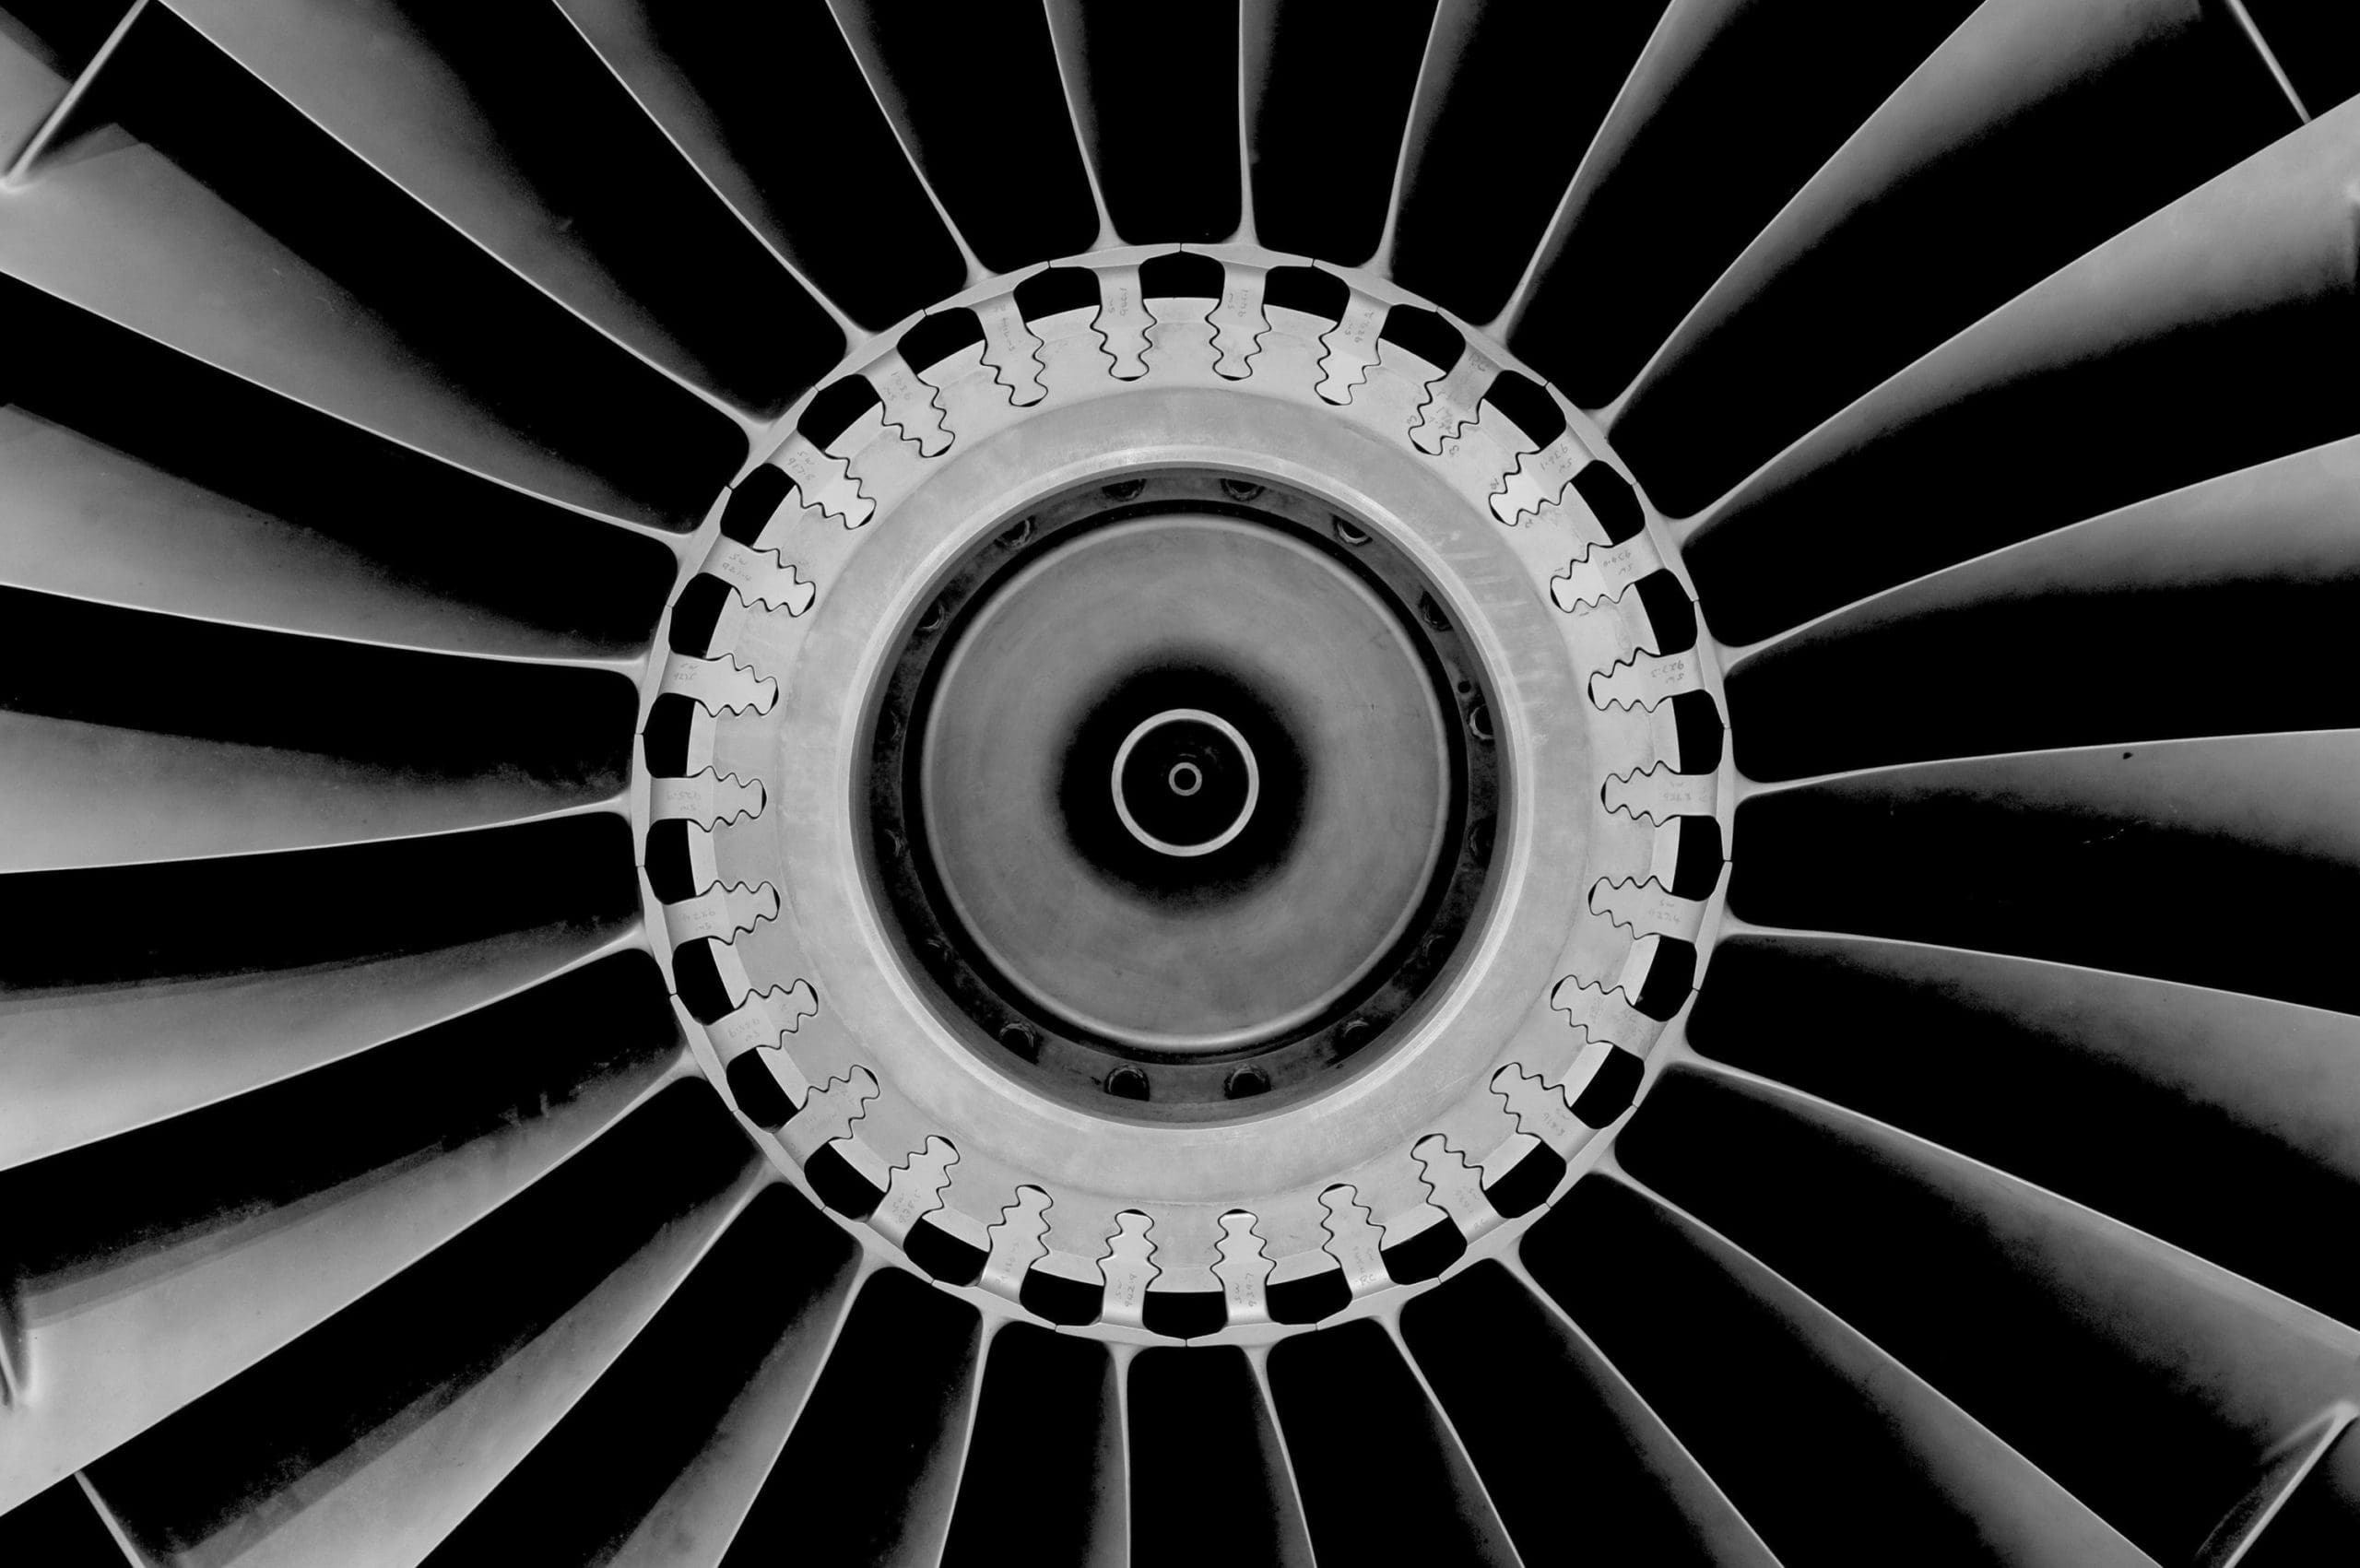 Close up image of the front of a Jet Fighter turbine